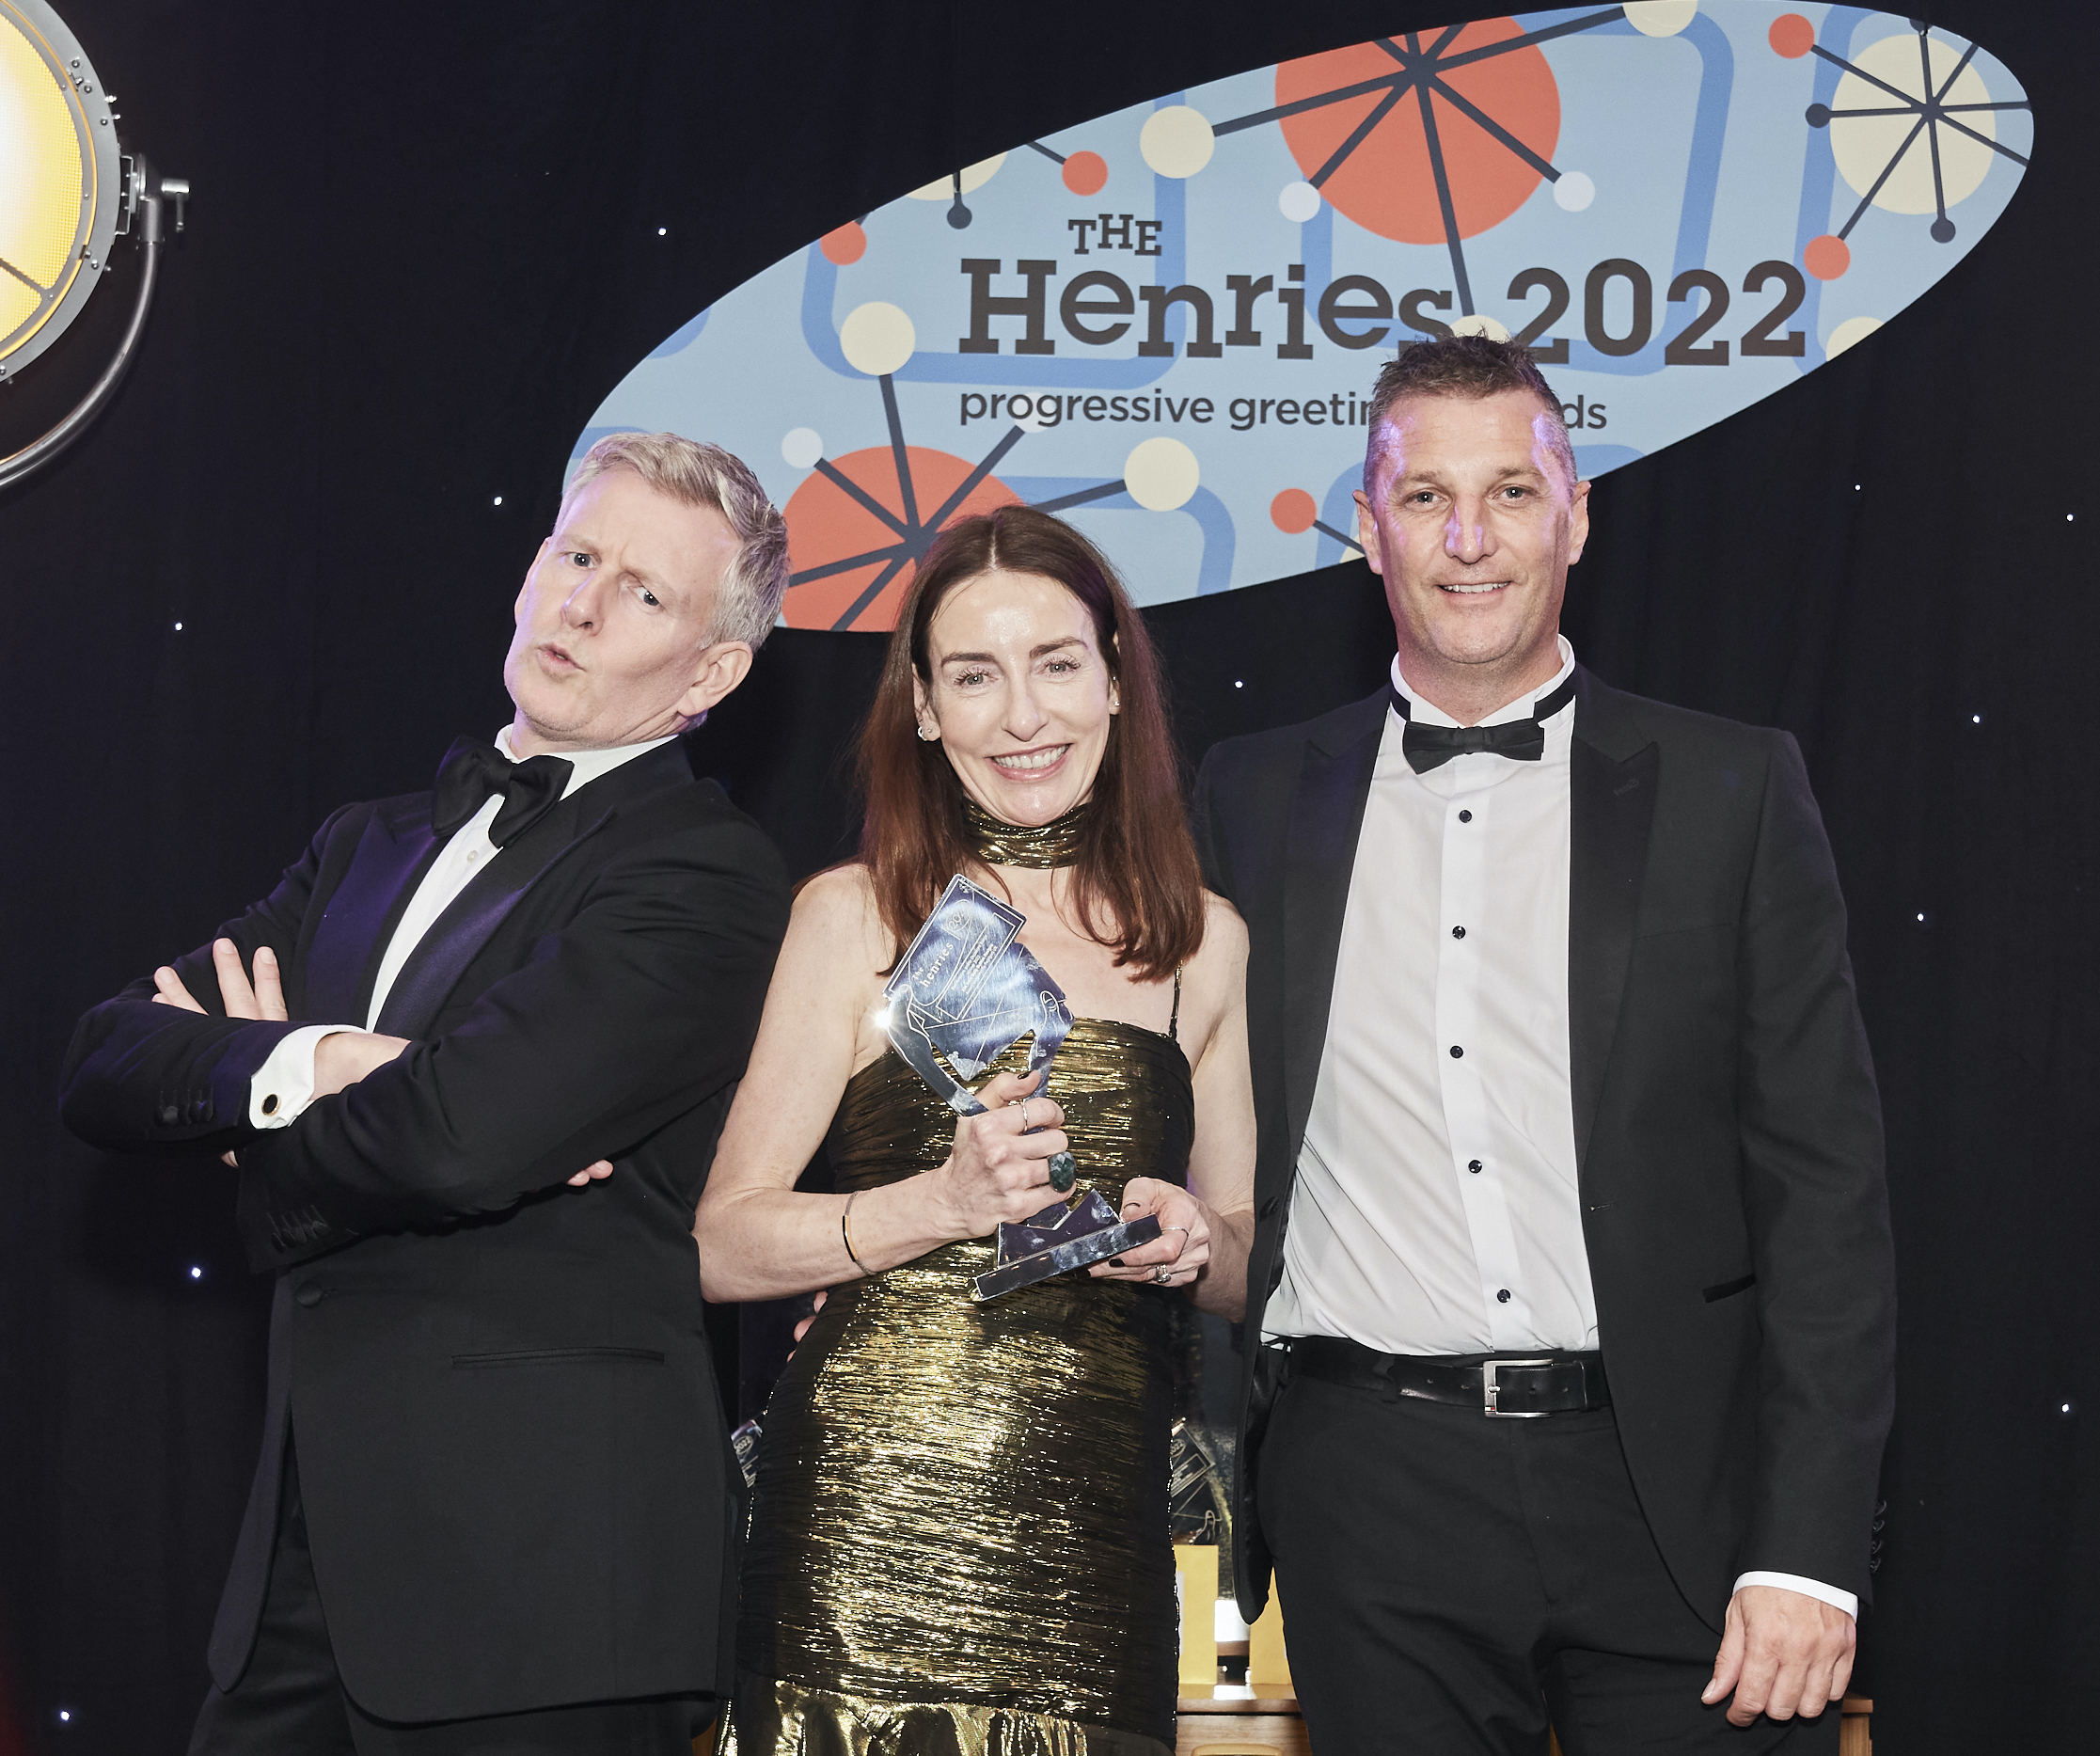 Above: As a sponsor of The Henries, Fedrigoni UK’s Pete Stevens (right) presented Rachel Hare, creative director and founder of Belly Button Designs. with Best Relations Or Occasions Range trophy for Elle at last October’s event hosted by Patrick Kielty